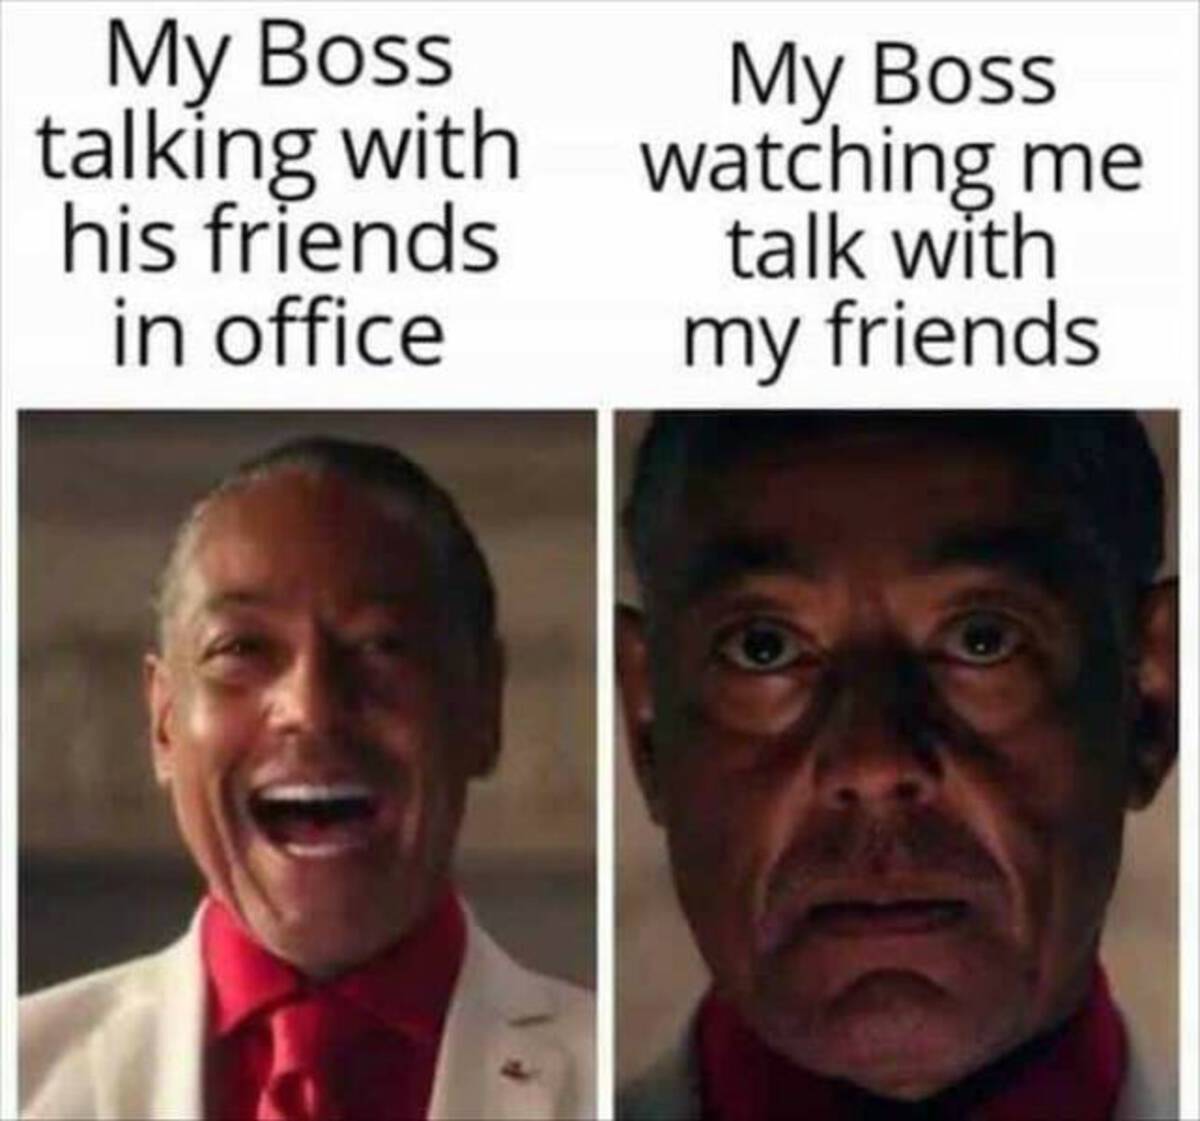 manuel noriega meme - My Boss talking with his friends in office My Boss watching me talk with my friends